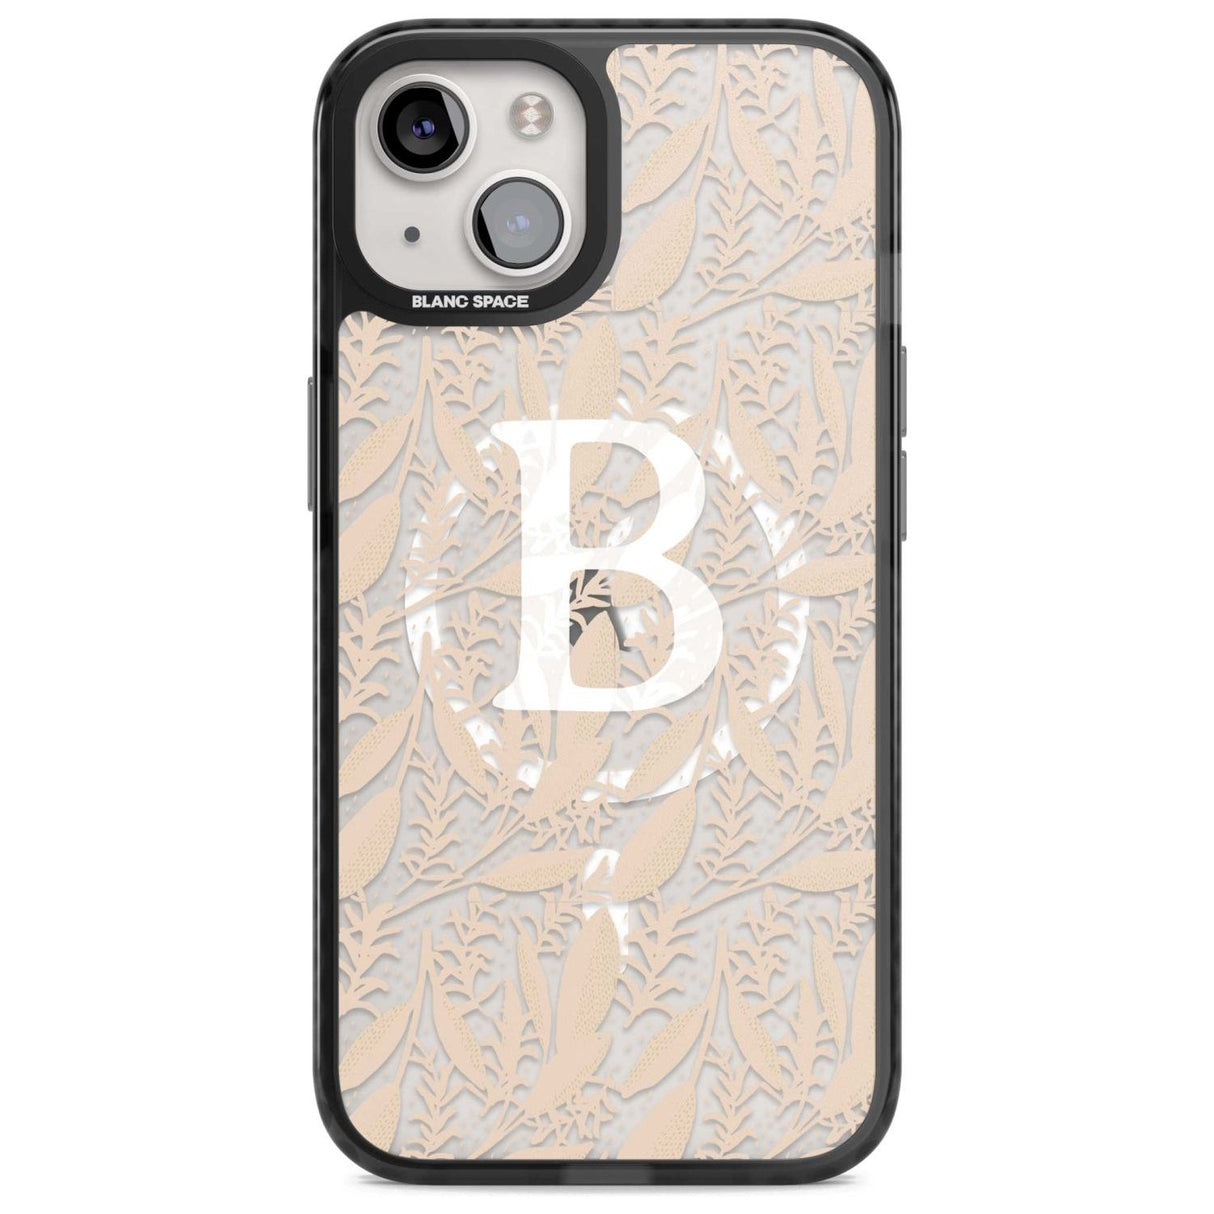 Personalised Subtle Monogram Abstract Floral Custom Phone Case iPhone 15 Plus / Magsafe Black Impact Case,iPhone 15 / Magsafe Black Impact Case,iPhone 14 Plus / Magsafe Black Impact Case,iPhone 14 / Magsafe Black Impact Case,iPhone 13 / Magsafe Black Impact Case Blanc Space